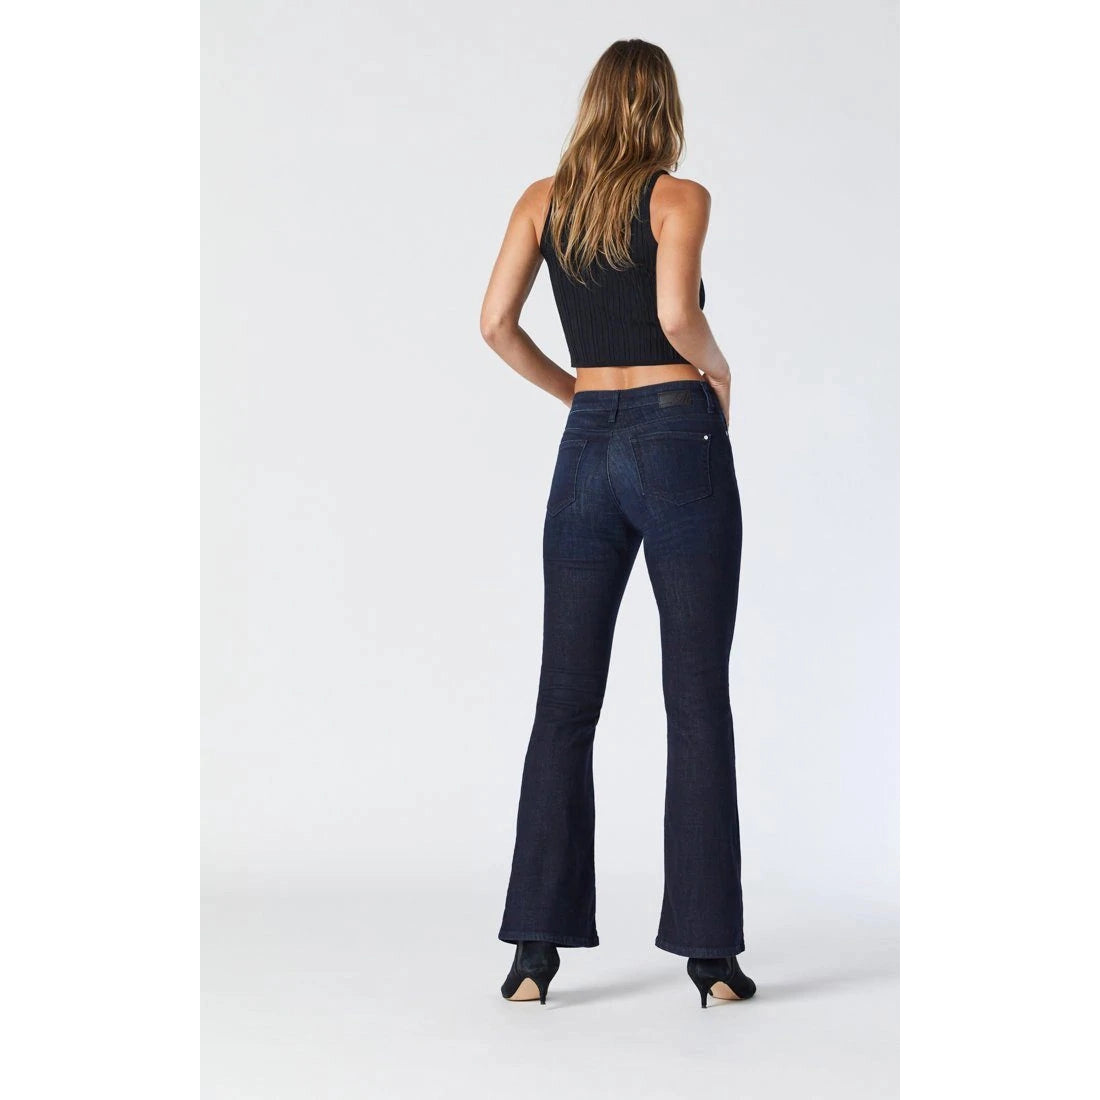 Mavi Sydney Rise Brushed Jeans-WOMENS CLOTHING-Kevin's Fine Outdoor Gear & Apparel